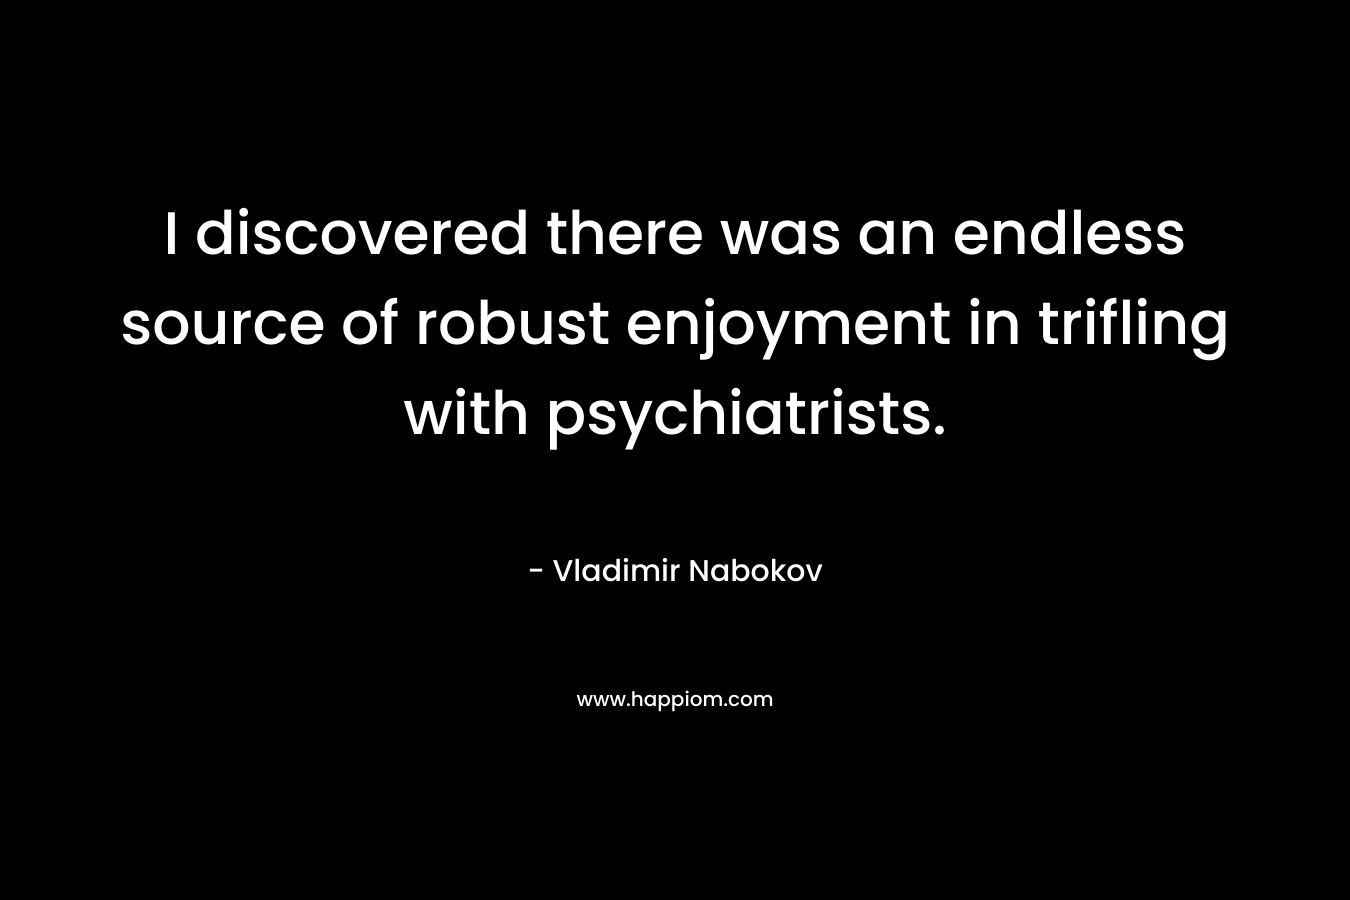 I discovered there was an endless source of robust enjoyment in trifling with psychiatrists. – Vladimir Nabokov